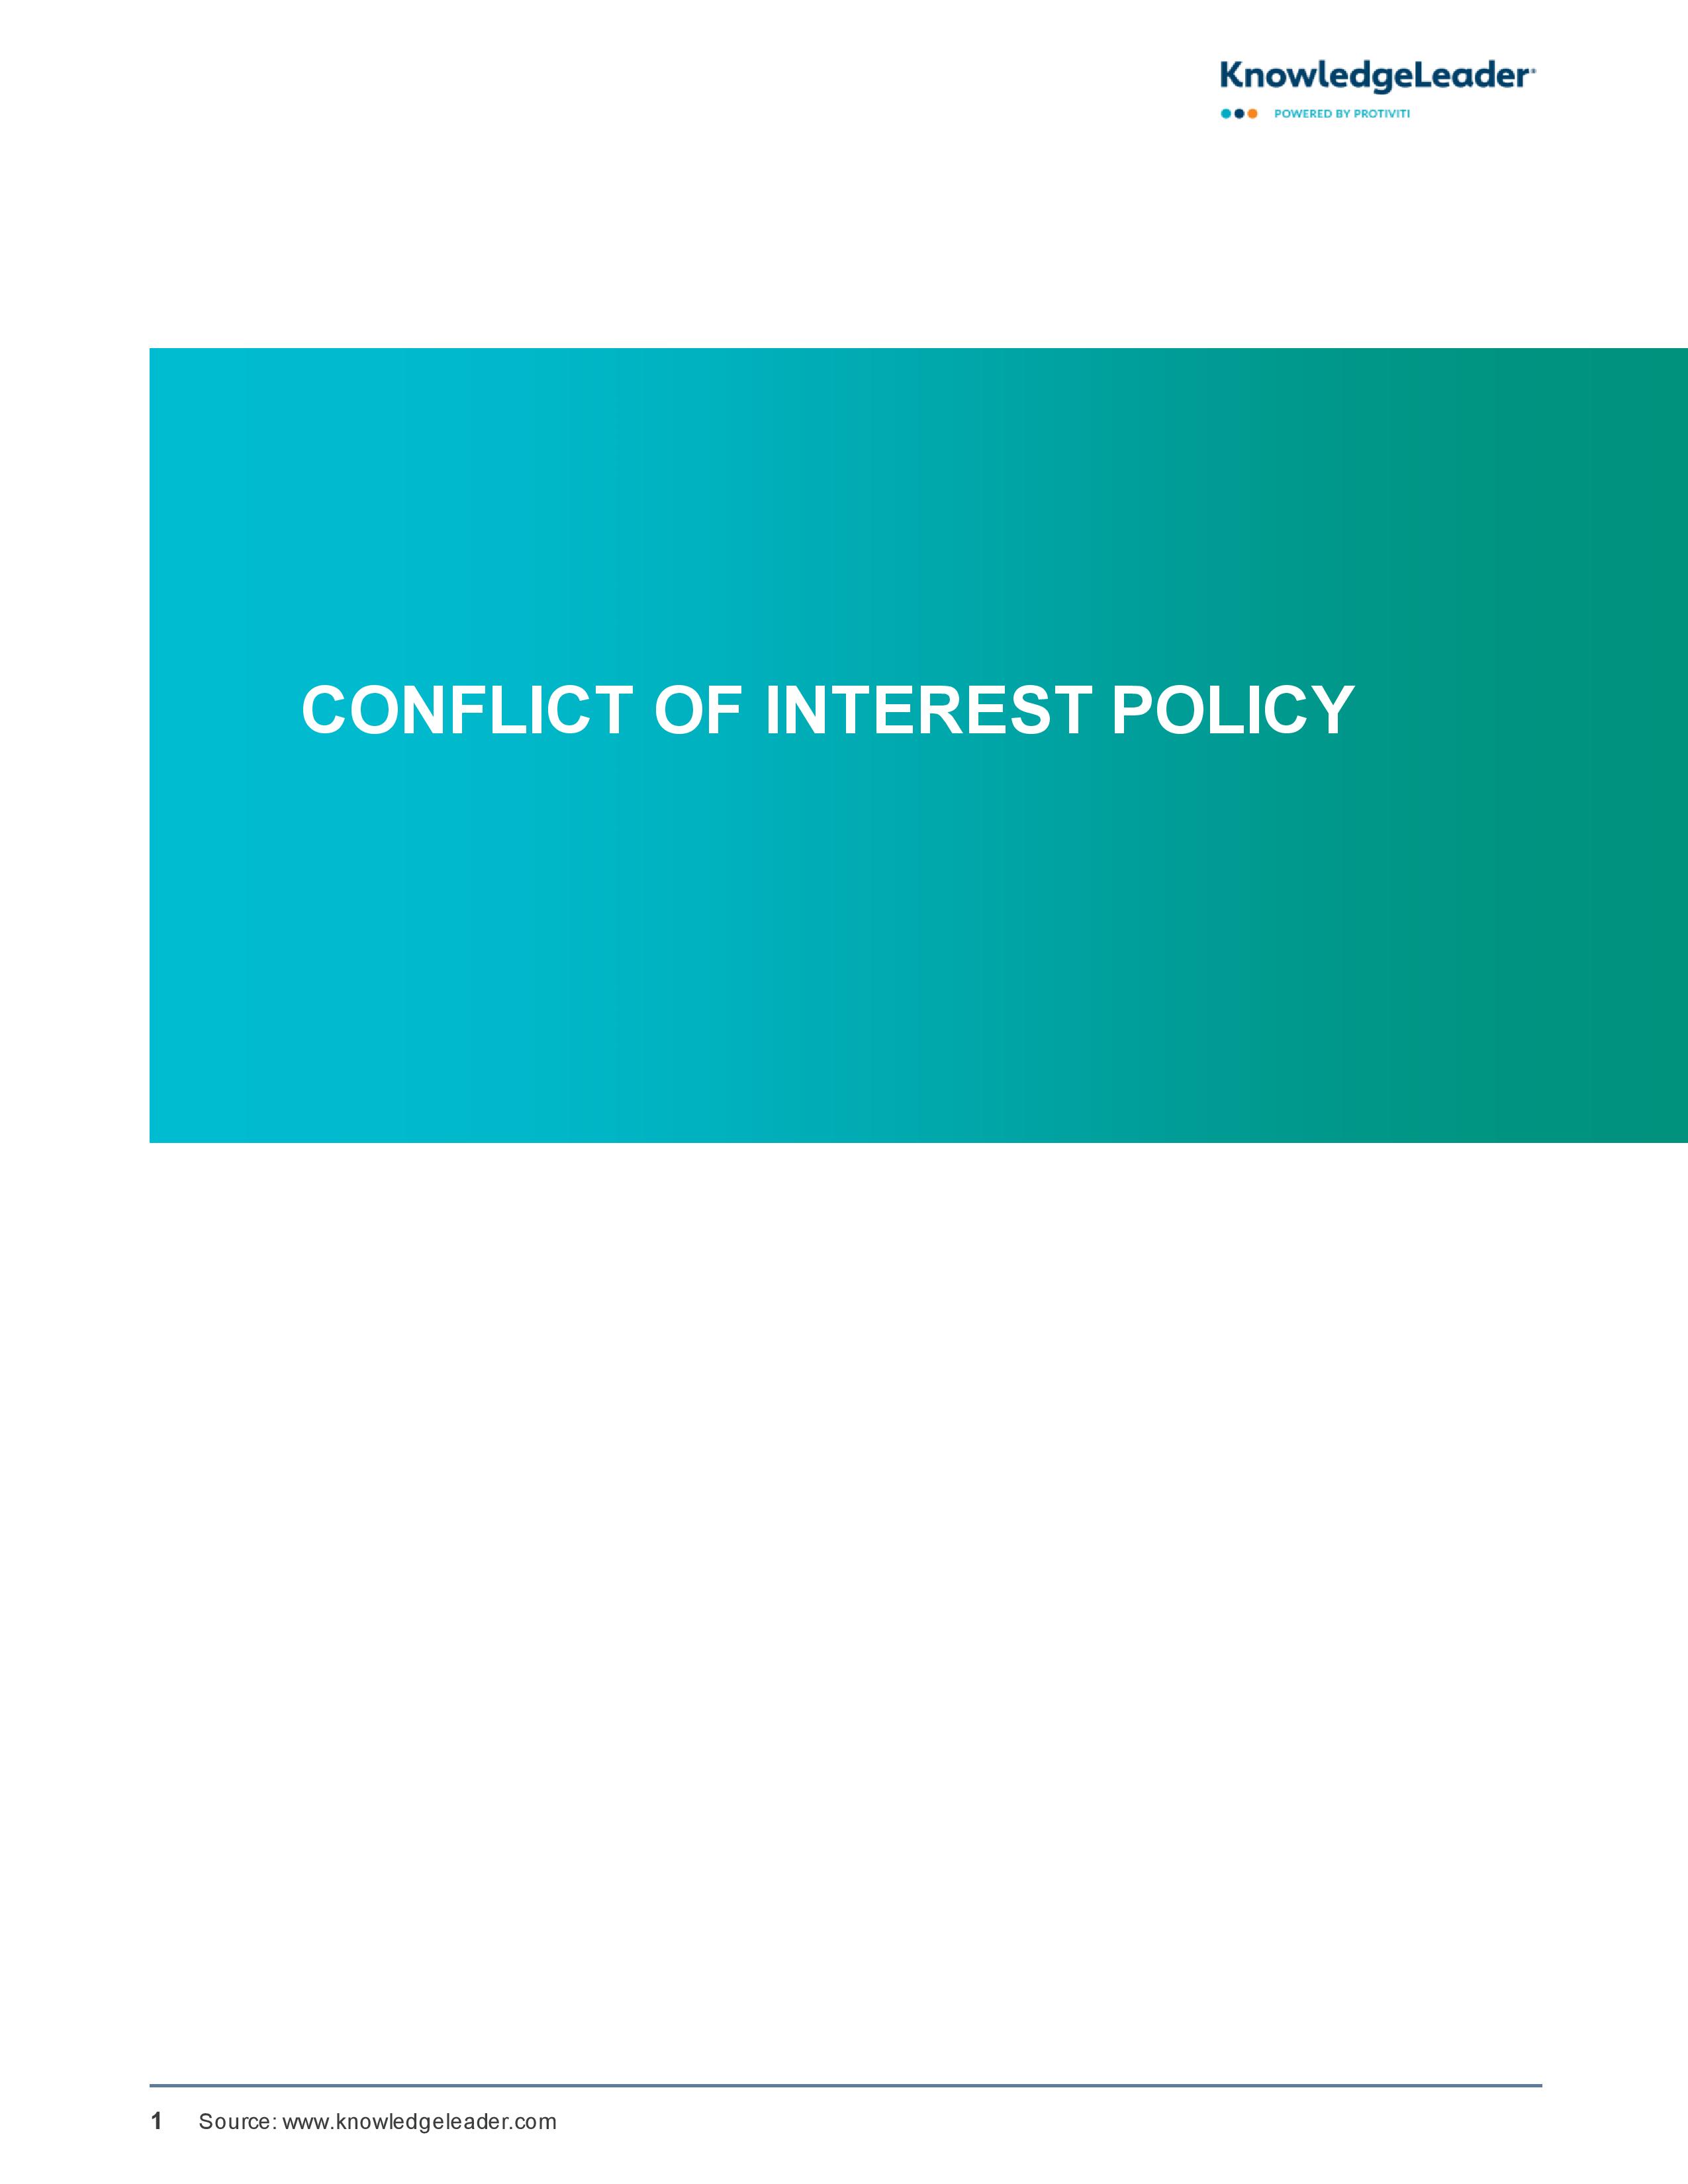 Screenshot of the first page of Conflict of Interest Policy